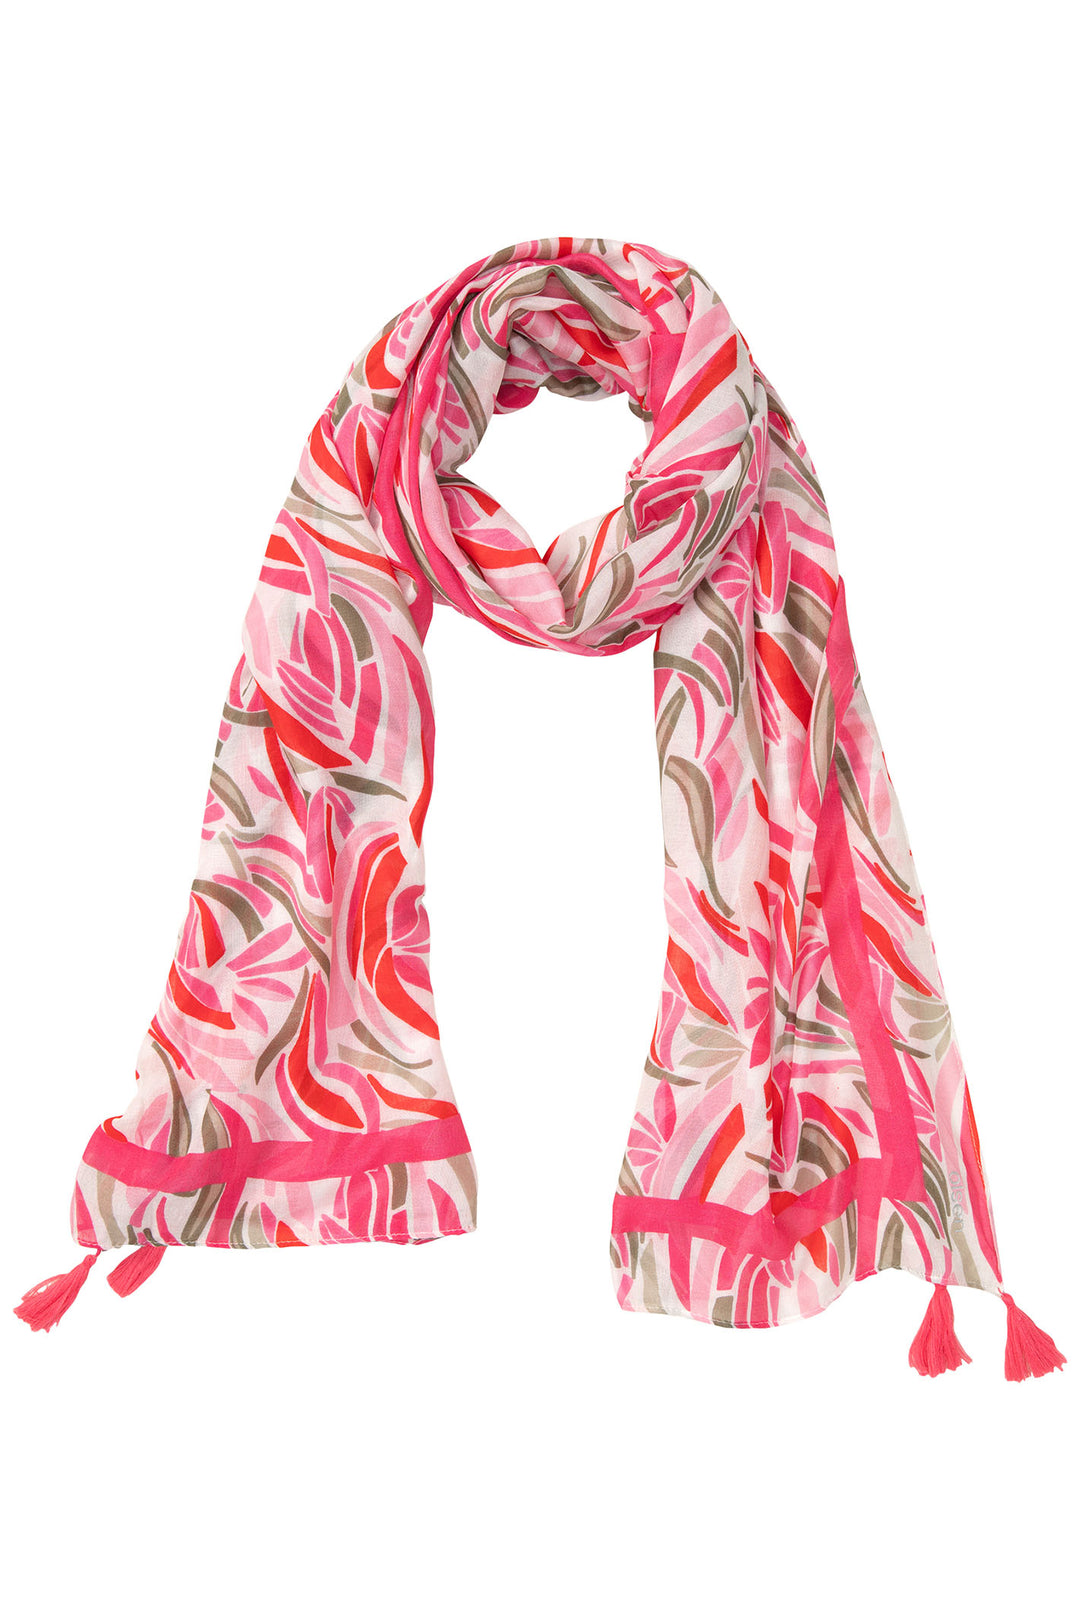 Olsen 18001902 Paradise Pink Scarf - Experience Boutique